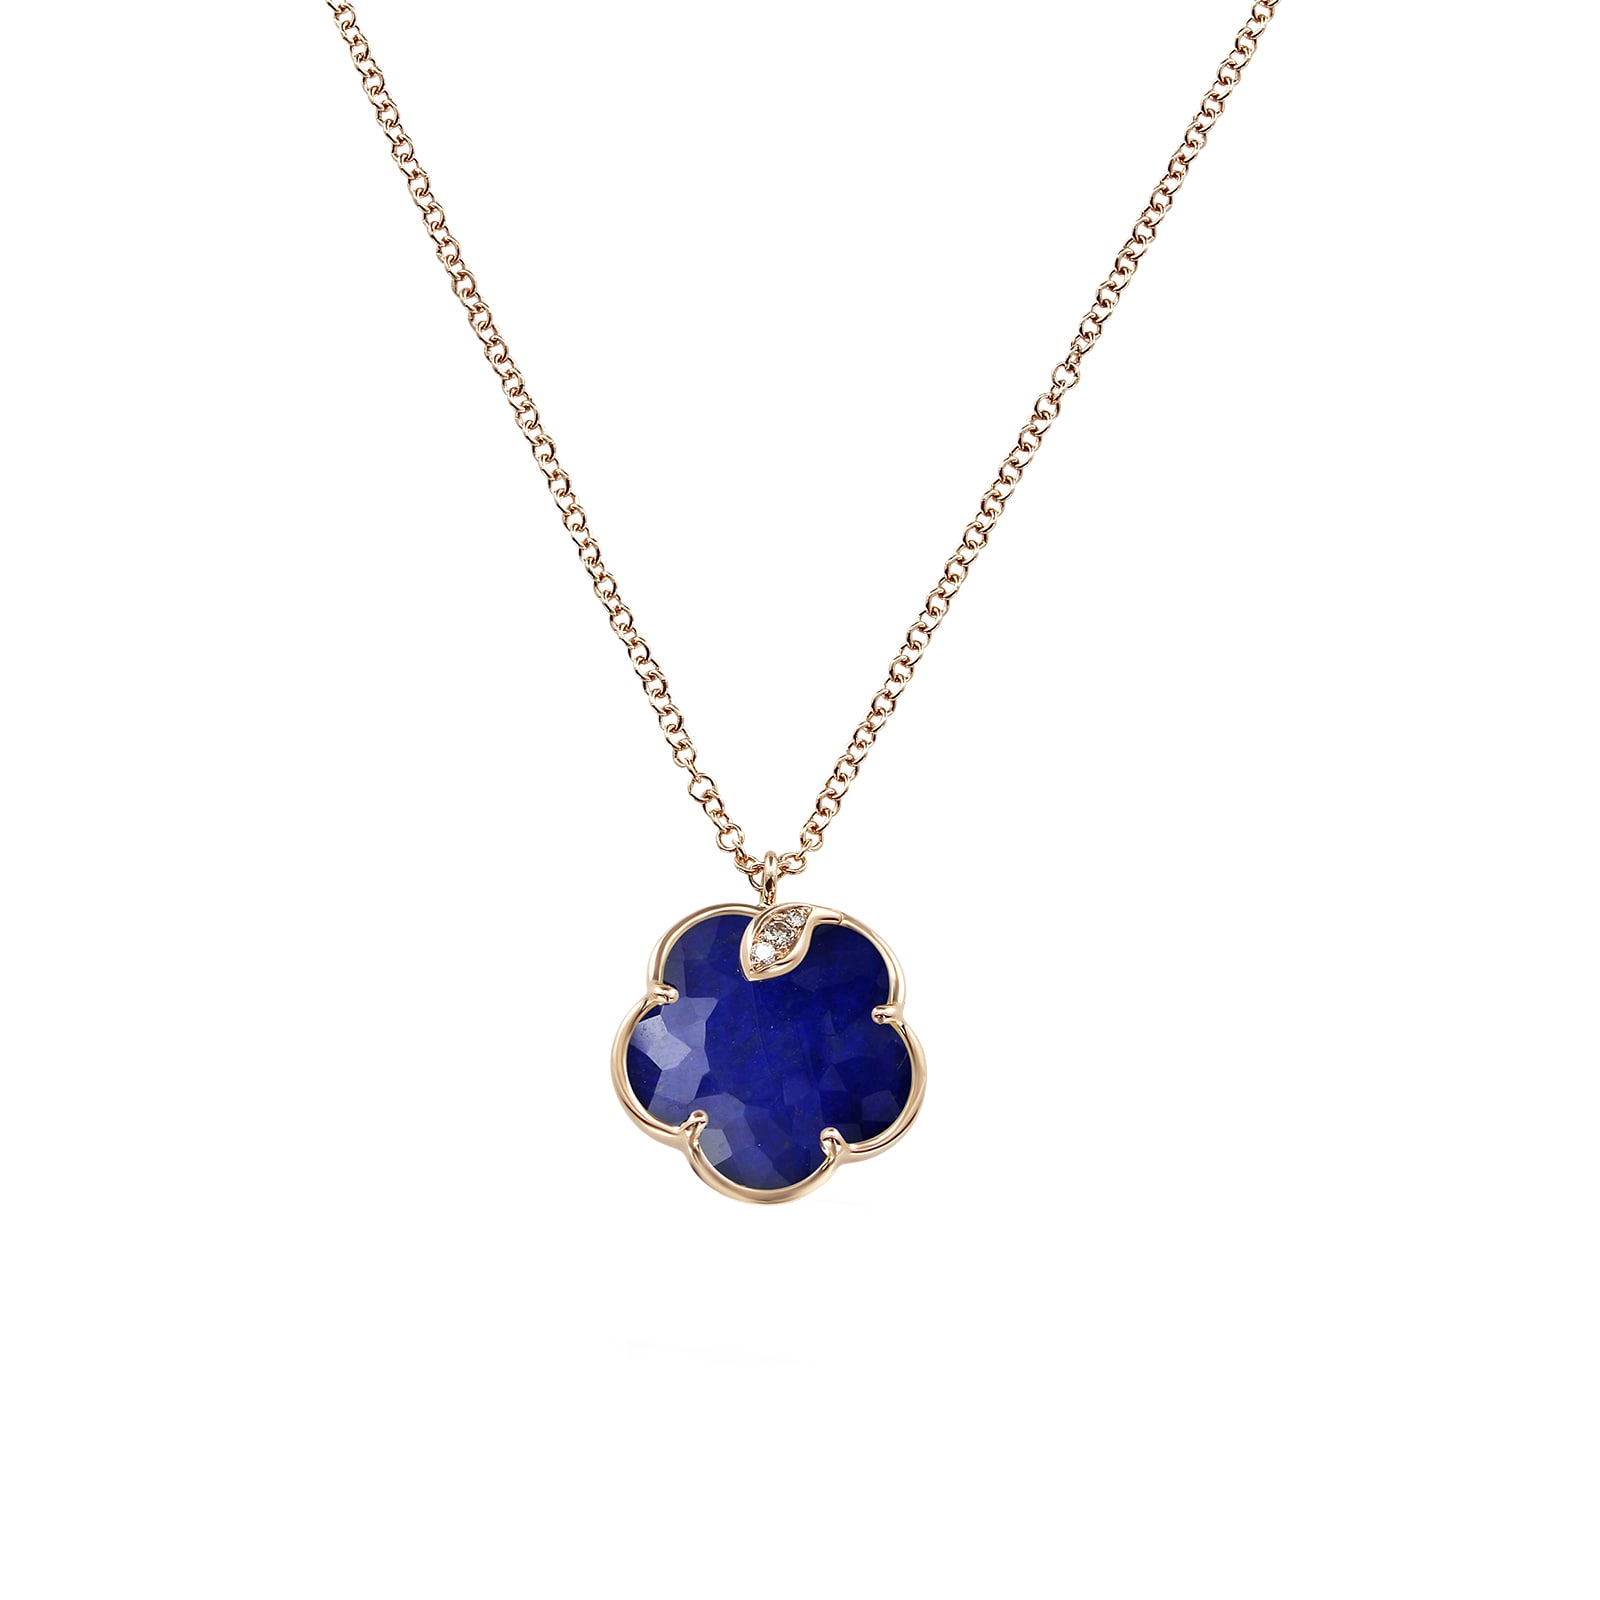 Petit Joli Necklace in 18ct Rose Gold with Rock Crystal and Lapis Lazuli doublet and Diamonds